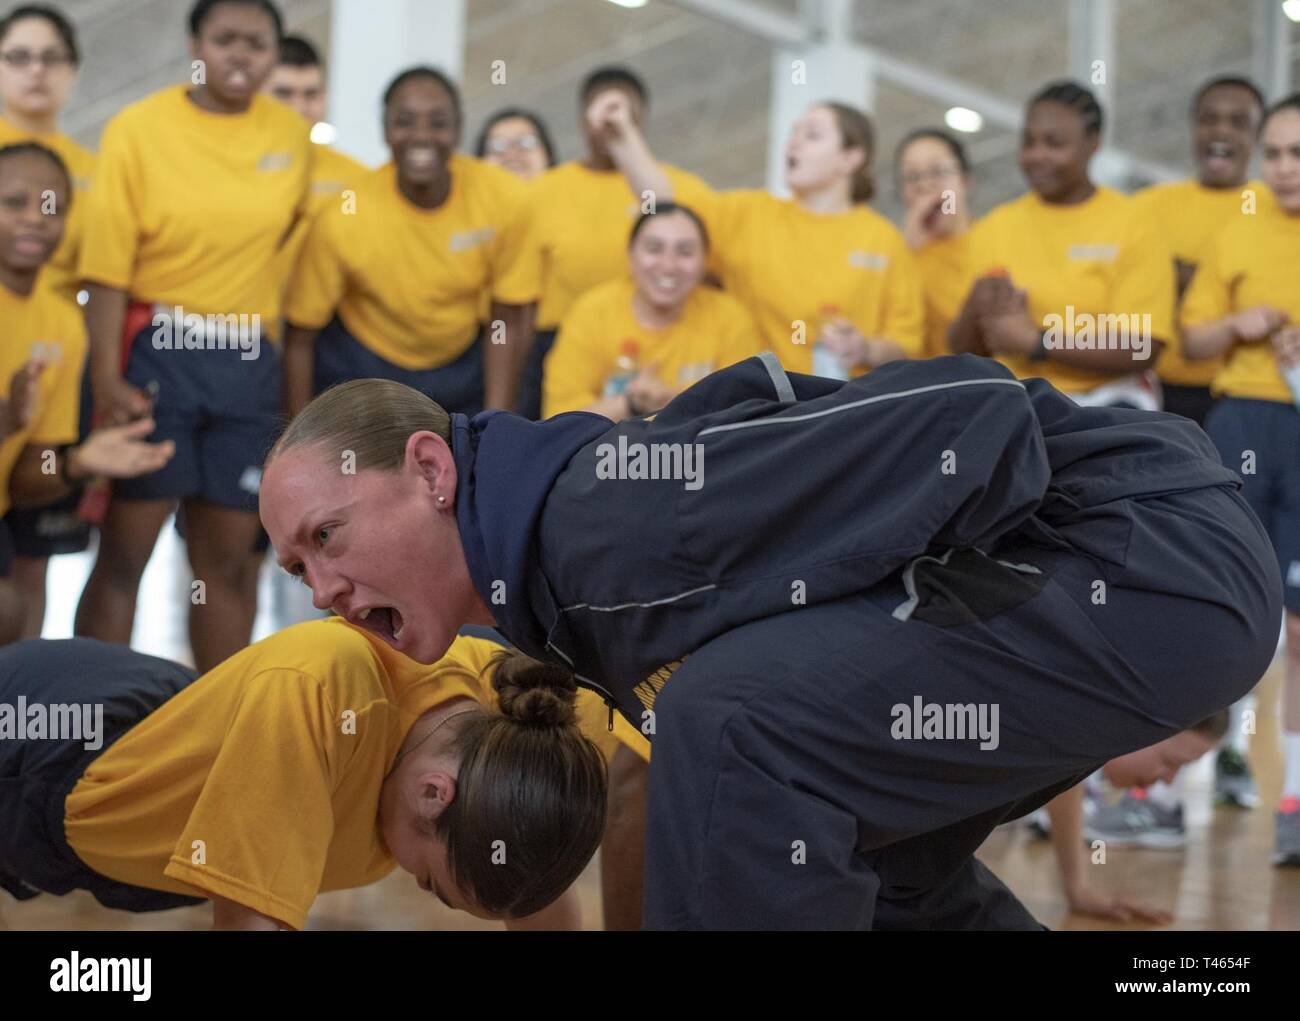 GREAT LAKES, Ill. (Mar. 2, 2019) Chief Aviation Machinist's Mate Sabrina Mayo, a recruit division commander, motivates recruits as they compete in a push-up contest inside Freedom Hall at Recruit Training Command. Recruit divisions compete against each other in 10 different fitness events to earn the Captain's Cup and the opportunity to display the Captain's Cup flag at their pass-in-review graduation ceremony. More than 30,000 recruits graduate annually from the Navy's only boot camp. Stock Photo